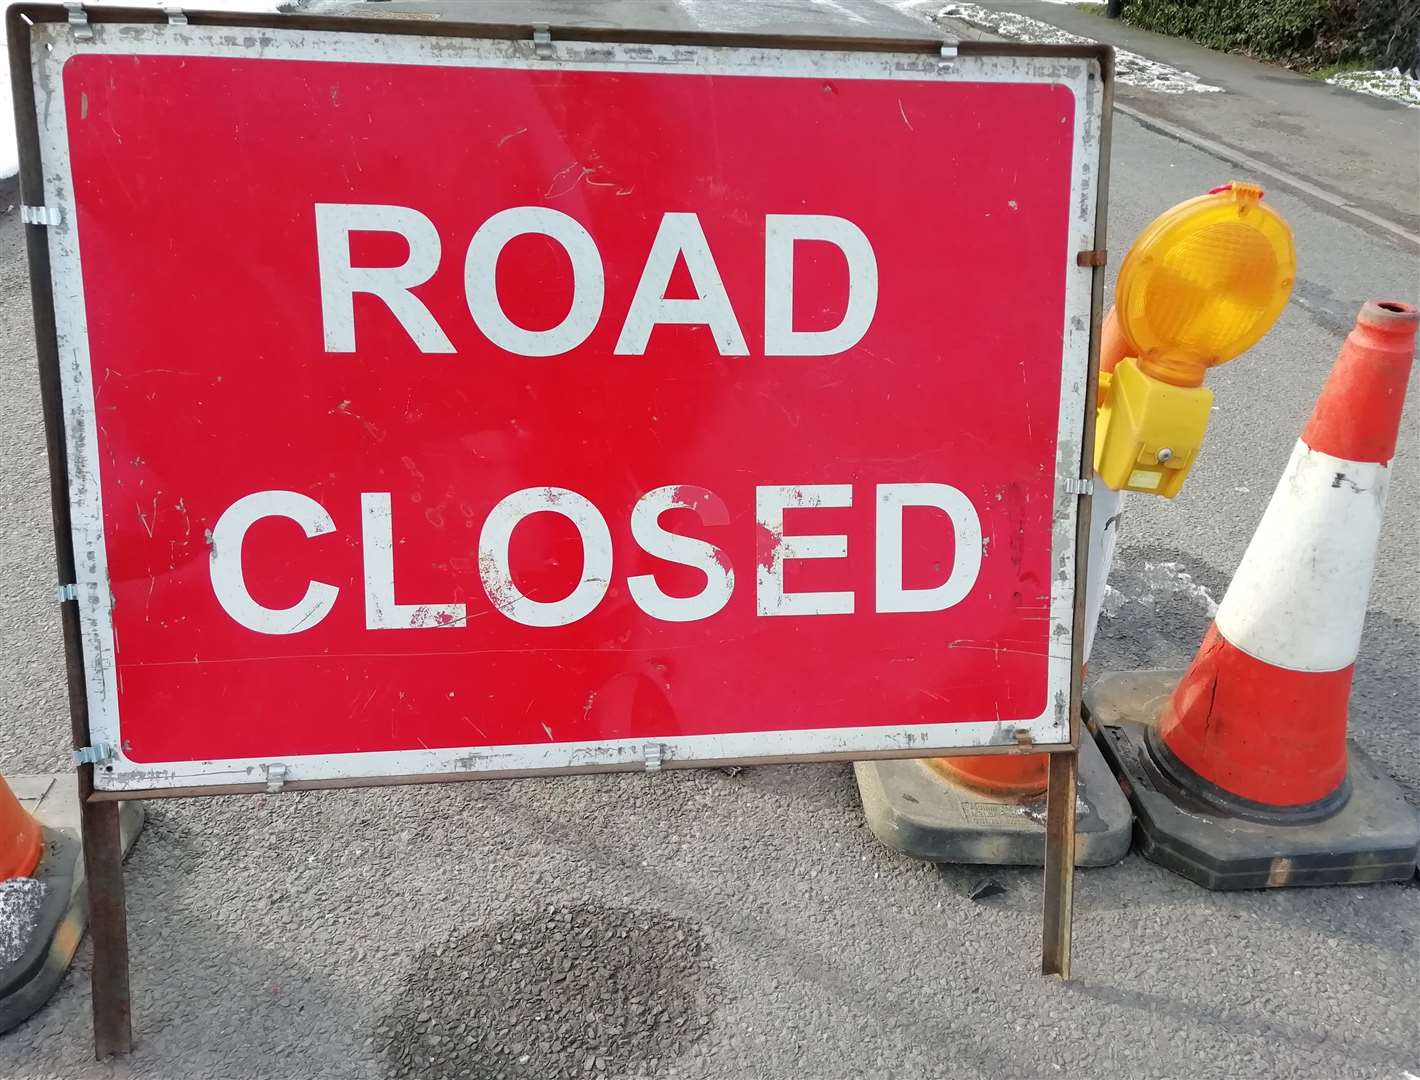 The road will be closed until August 4